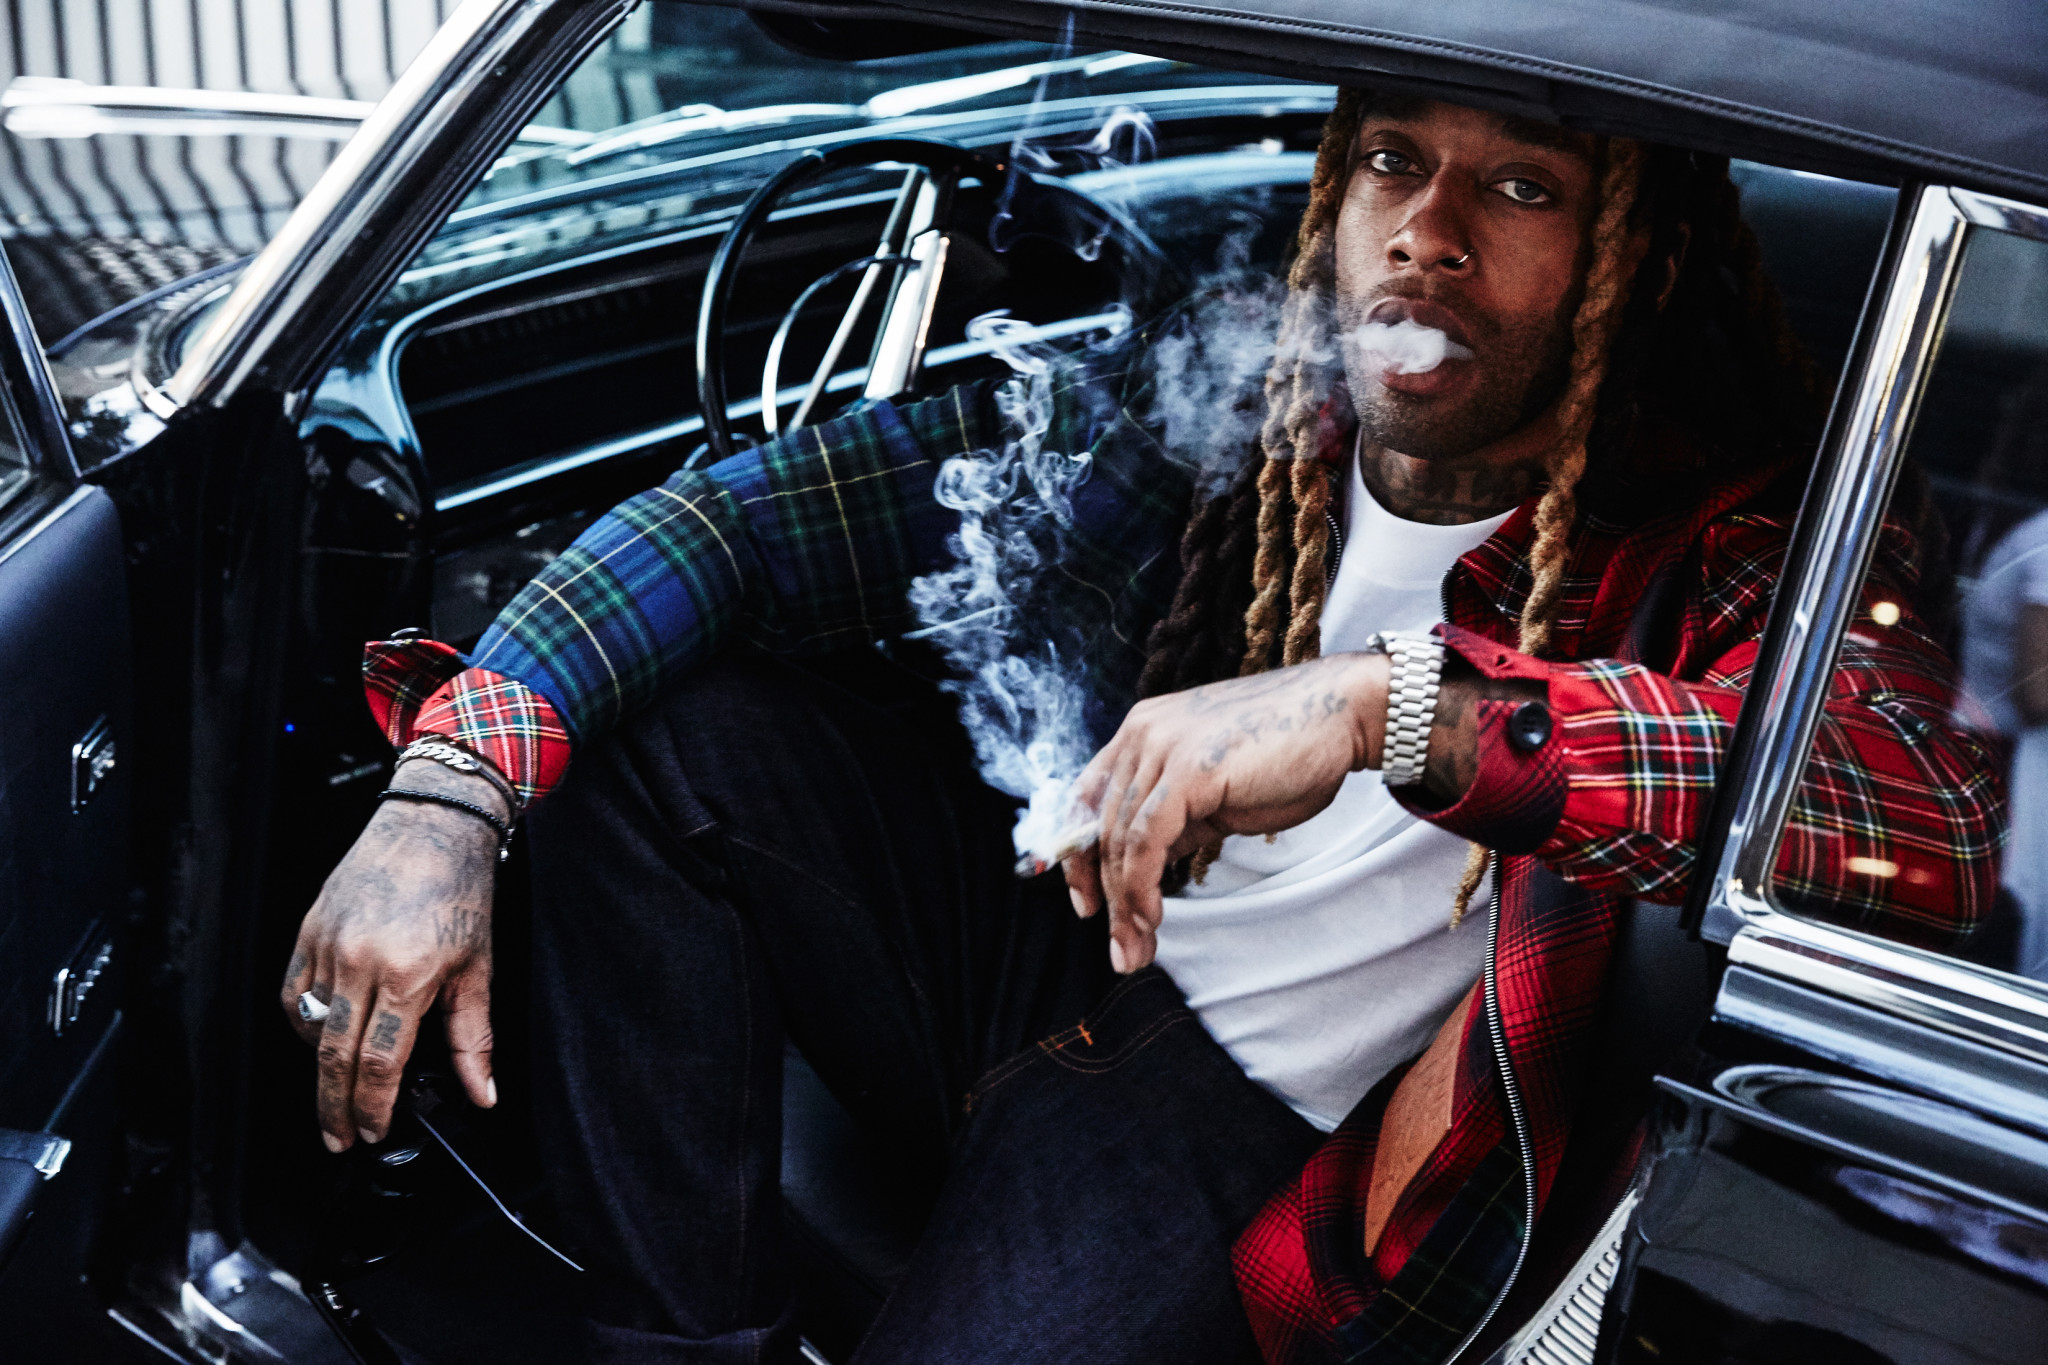 SSENSE Questions Ty Dolla $ign About His Take Off, Style and Up-Bringing